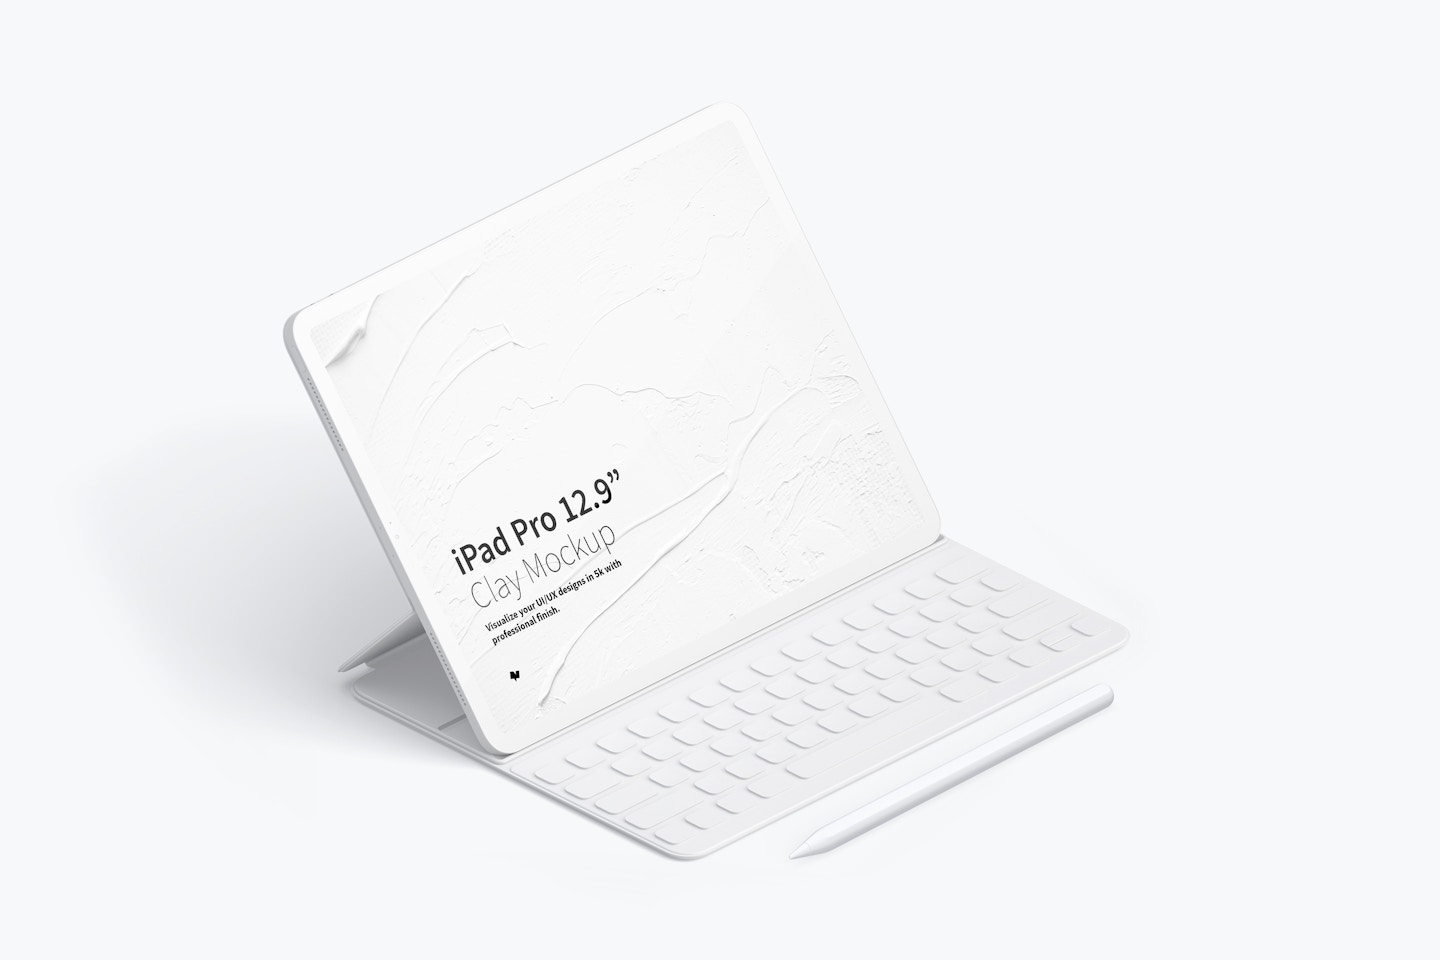 Clay iPad Pro 12.9” Mockup, Isometric Left View With Keyboard